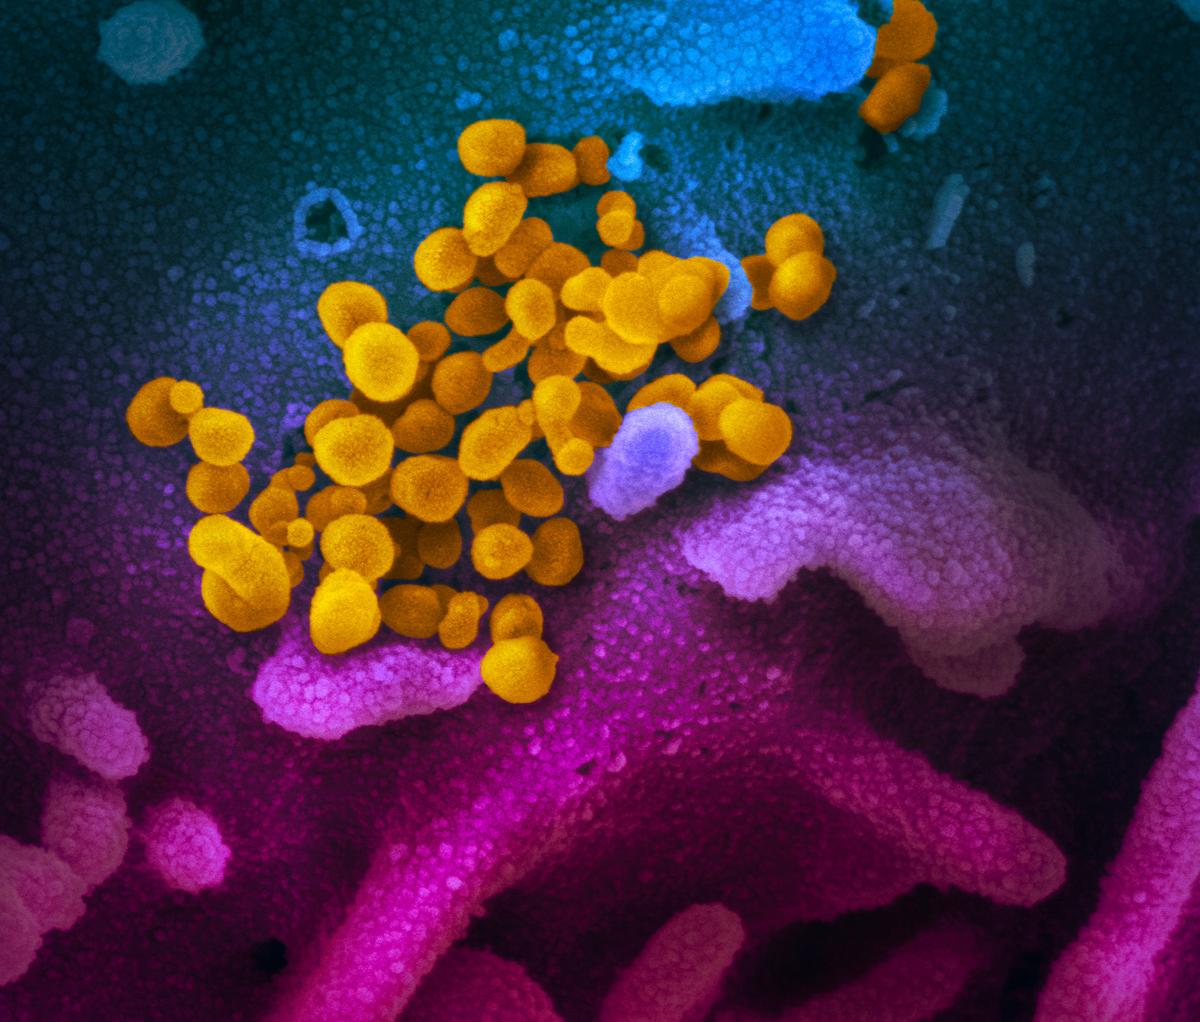 This scanning electron microscope image, published on Feb. 13, 2020, shows SARS-CoV-2 (yellow)—which the Epoch Times refers to as the CCP virus—the pathogen that causes COVID-19. The virus was isolated from a patient in the United States and is seen emerging from the surface of cells (blue/pink) cultured in the lab. (Courtesy of NIAID-RML)